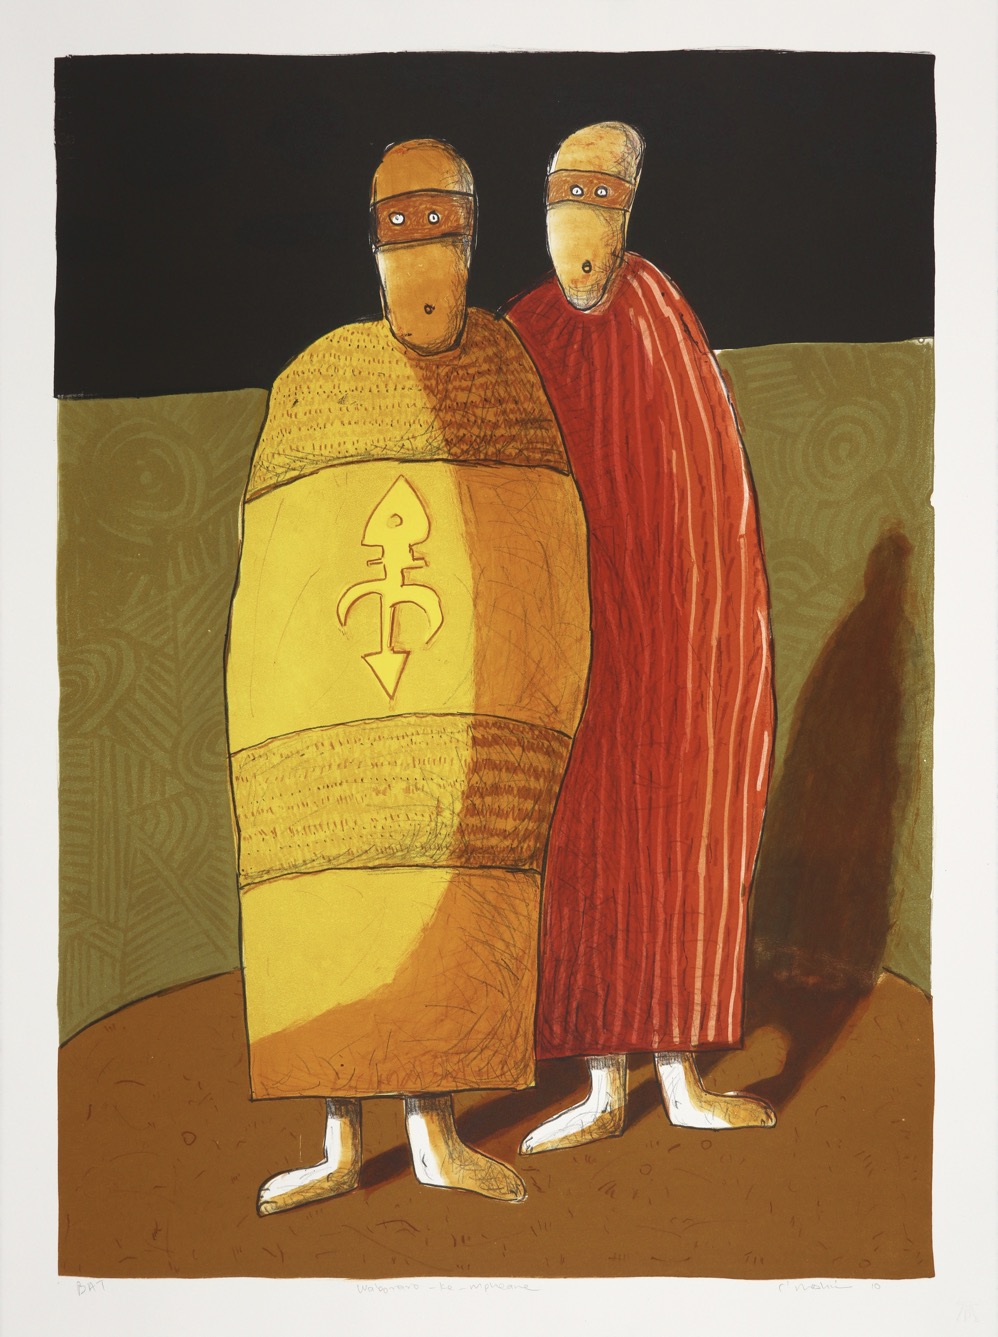 Two cloaked figures with a single shadow standing next to each other in a patterned enclosure